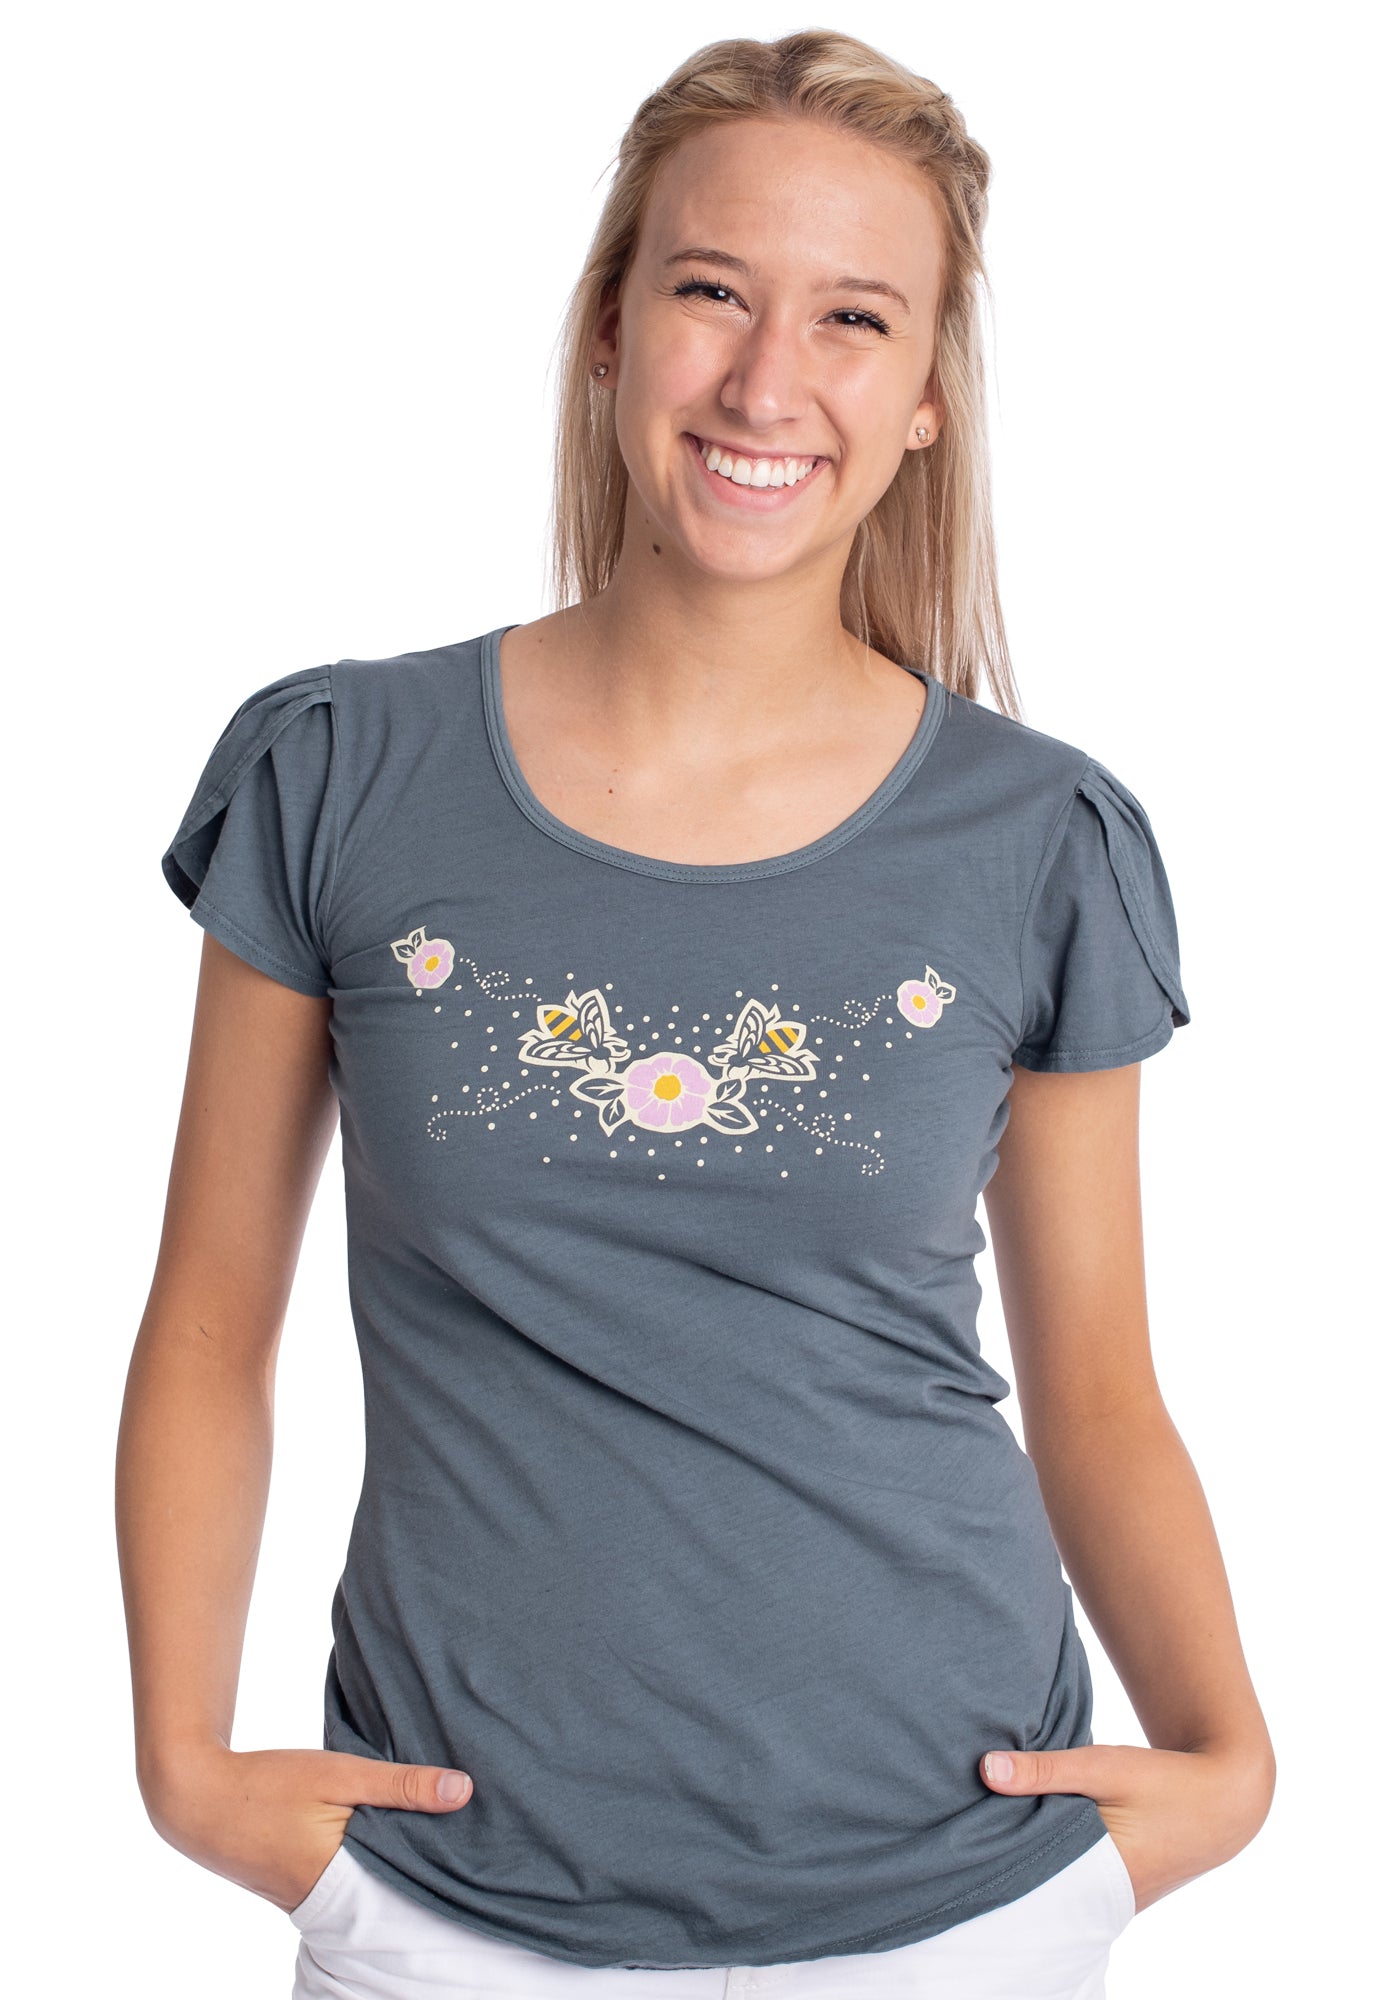 Grey tulip-sleeved tee with print of flowers and bees on blonde model 